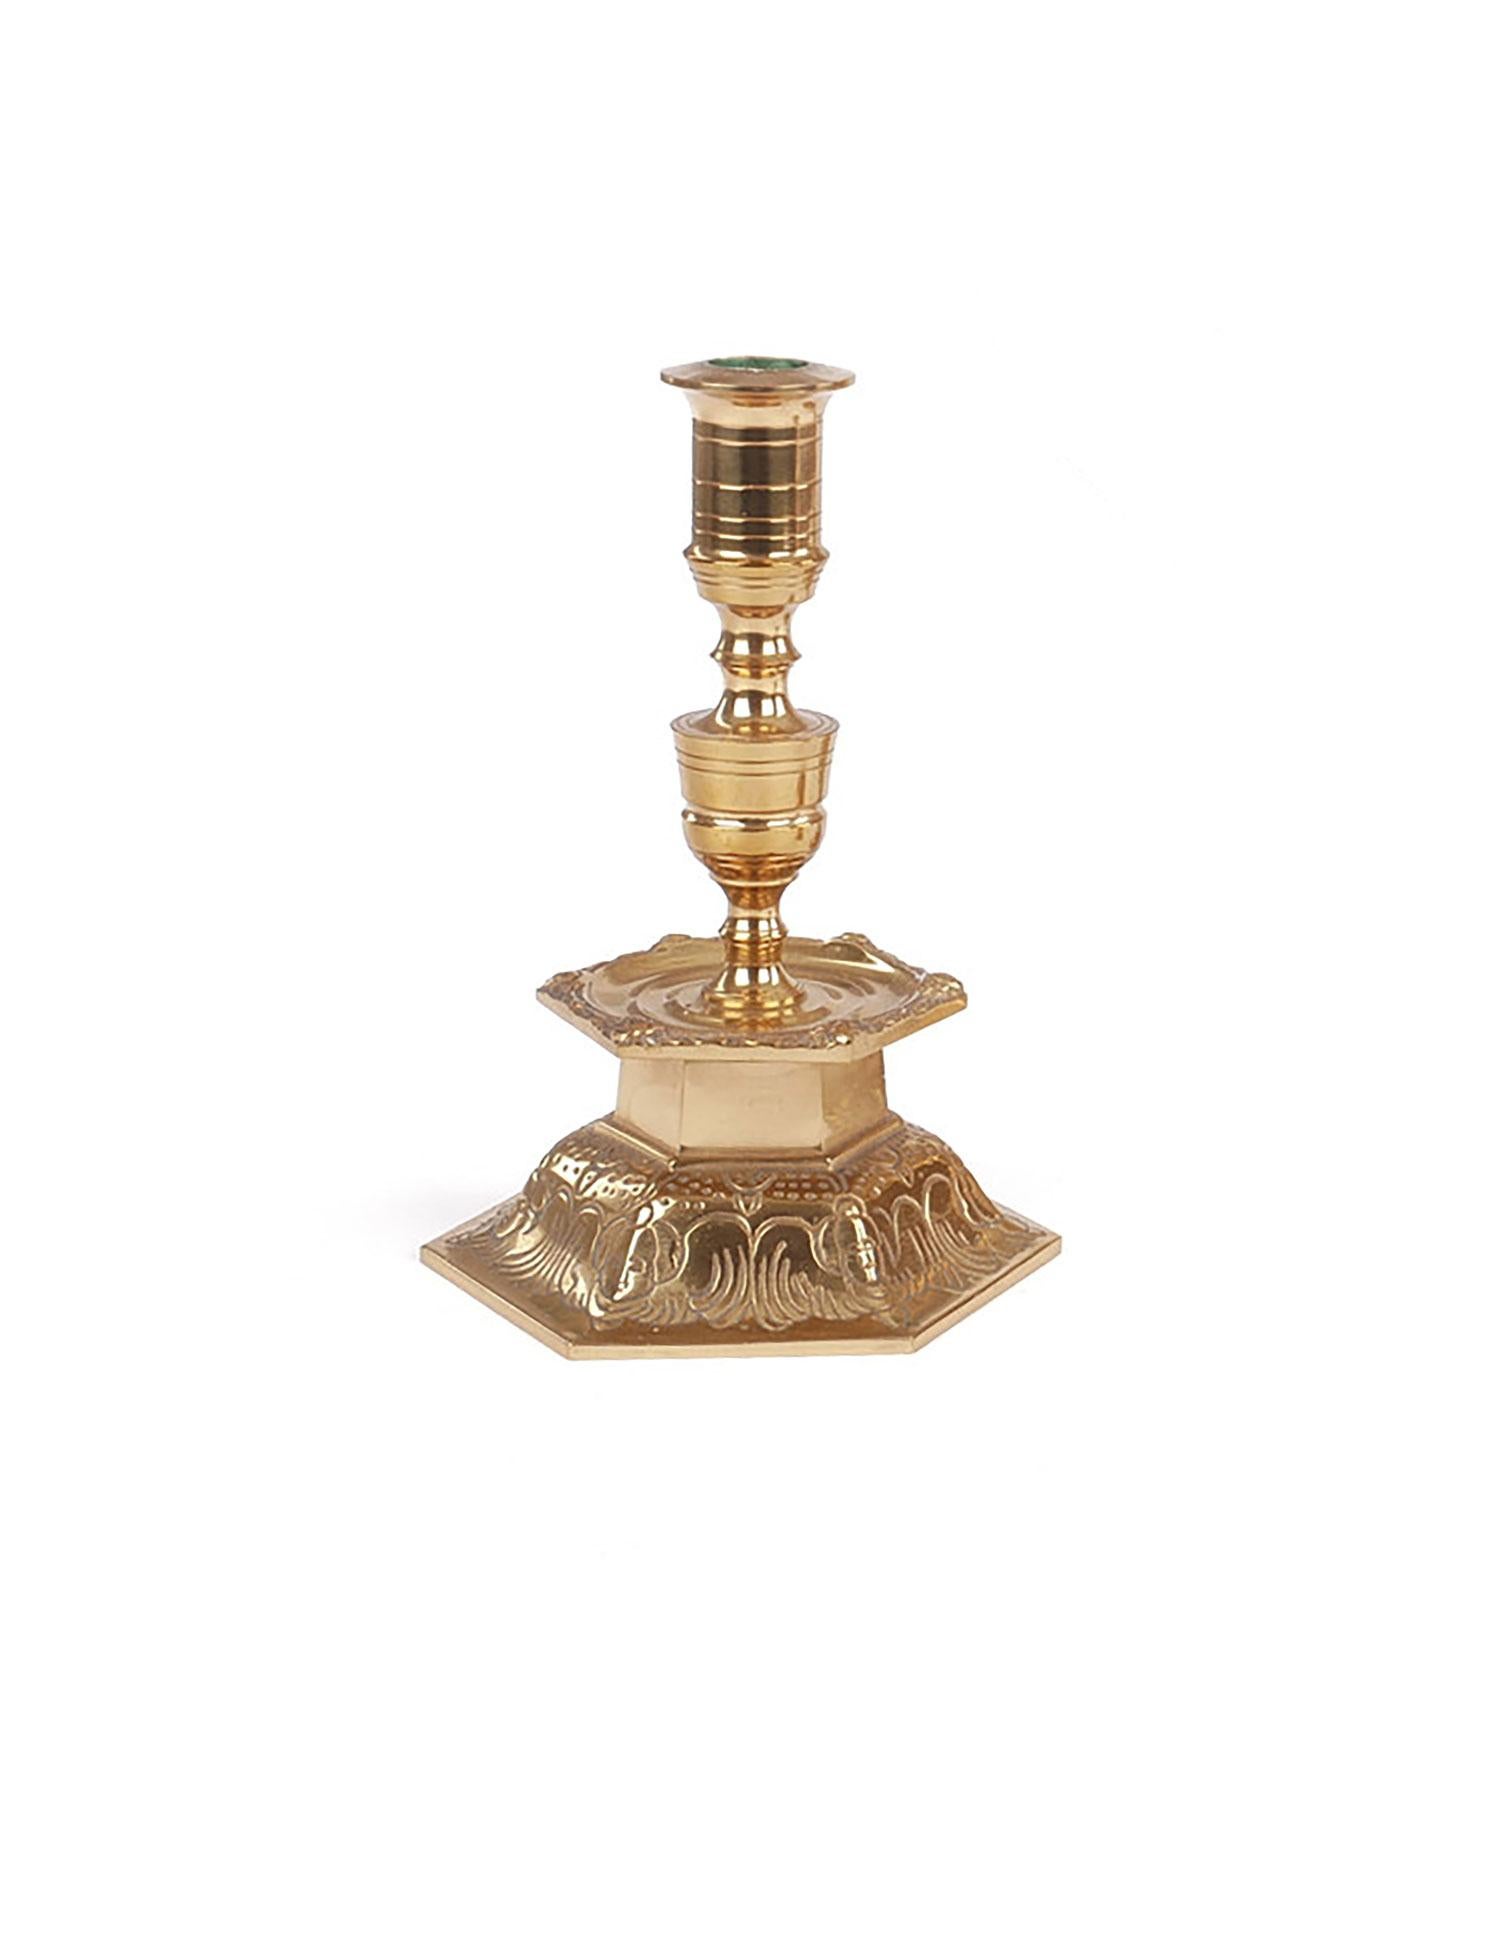 We are happy to offer you this set of brass-hammered menorah with a pair of small brass candleholders and a single medium-size candlestick. With Hanukkah just a few weeks away, now is the time to treat yourself to a gorgeous new brass menorah. It